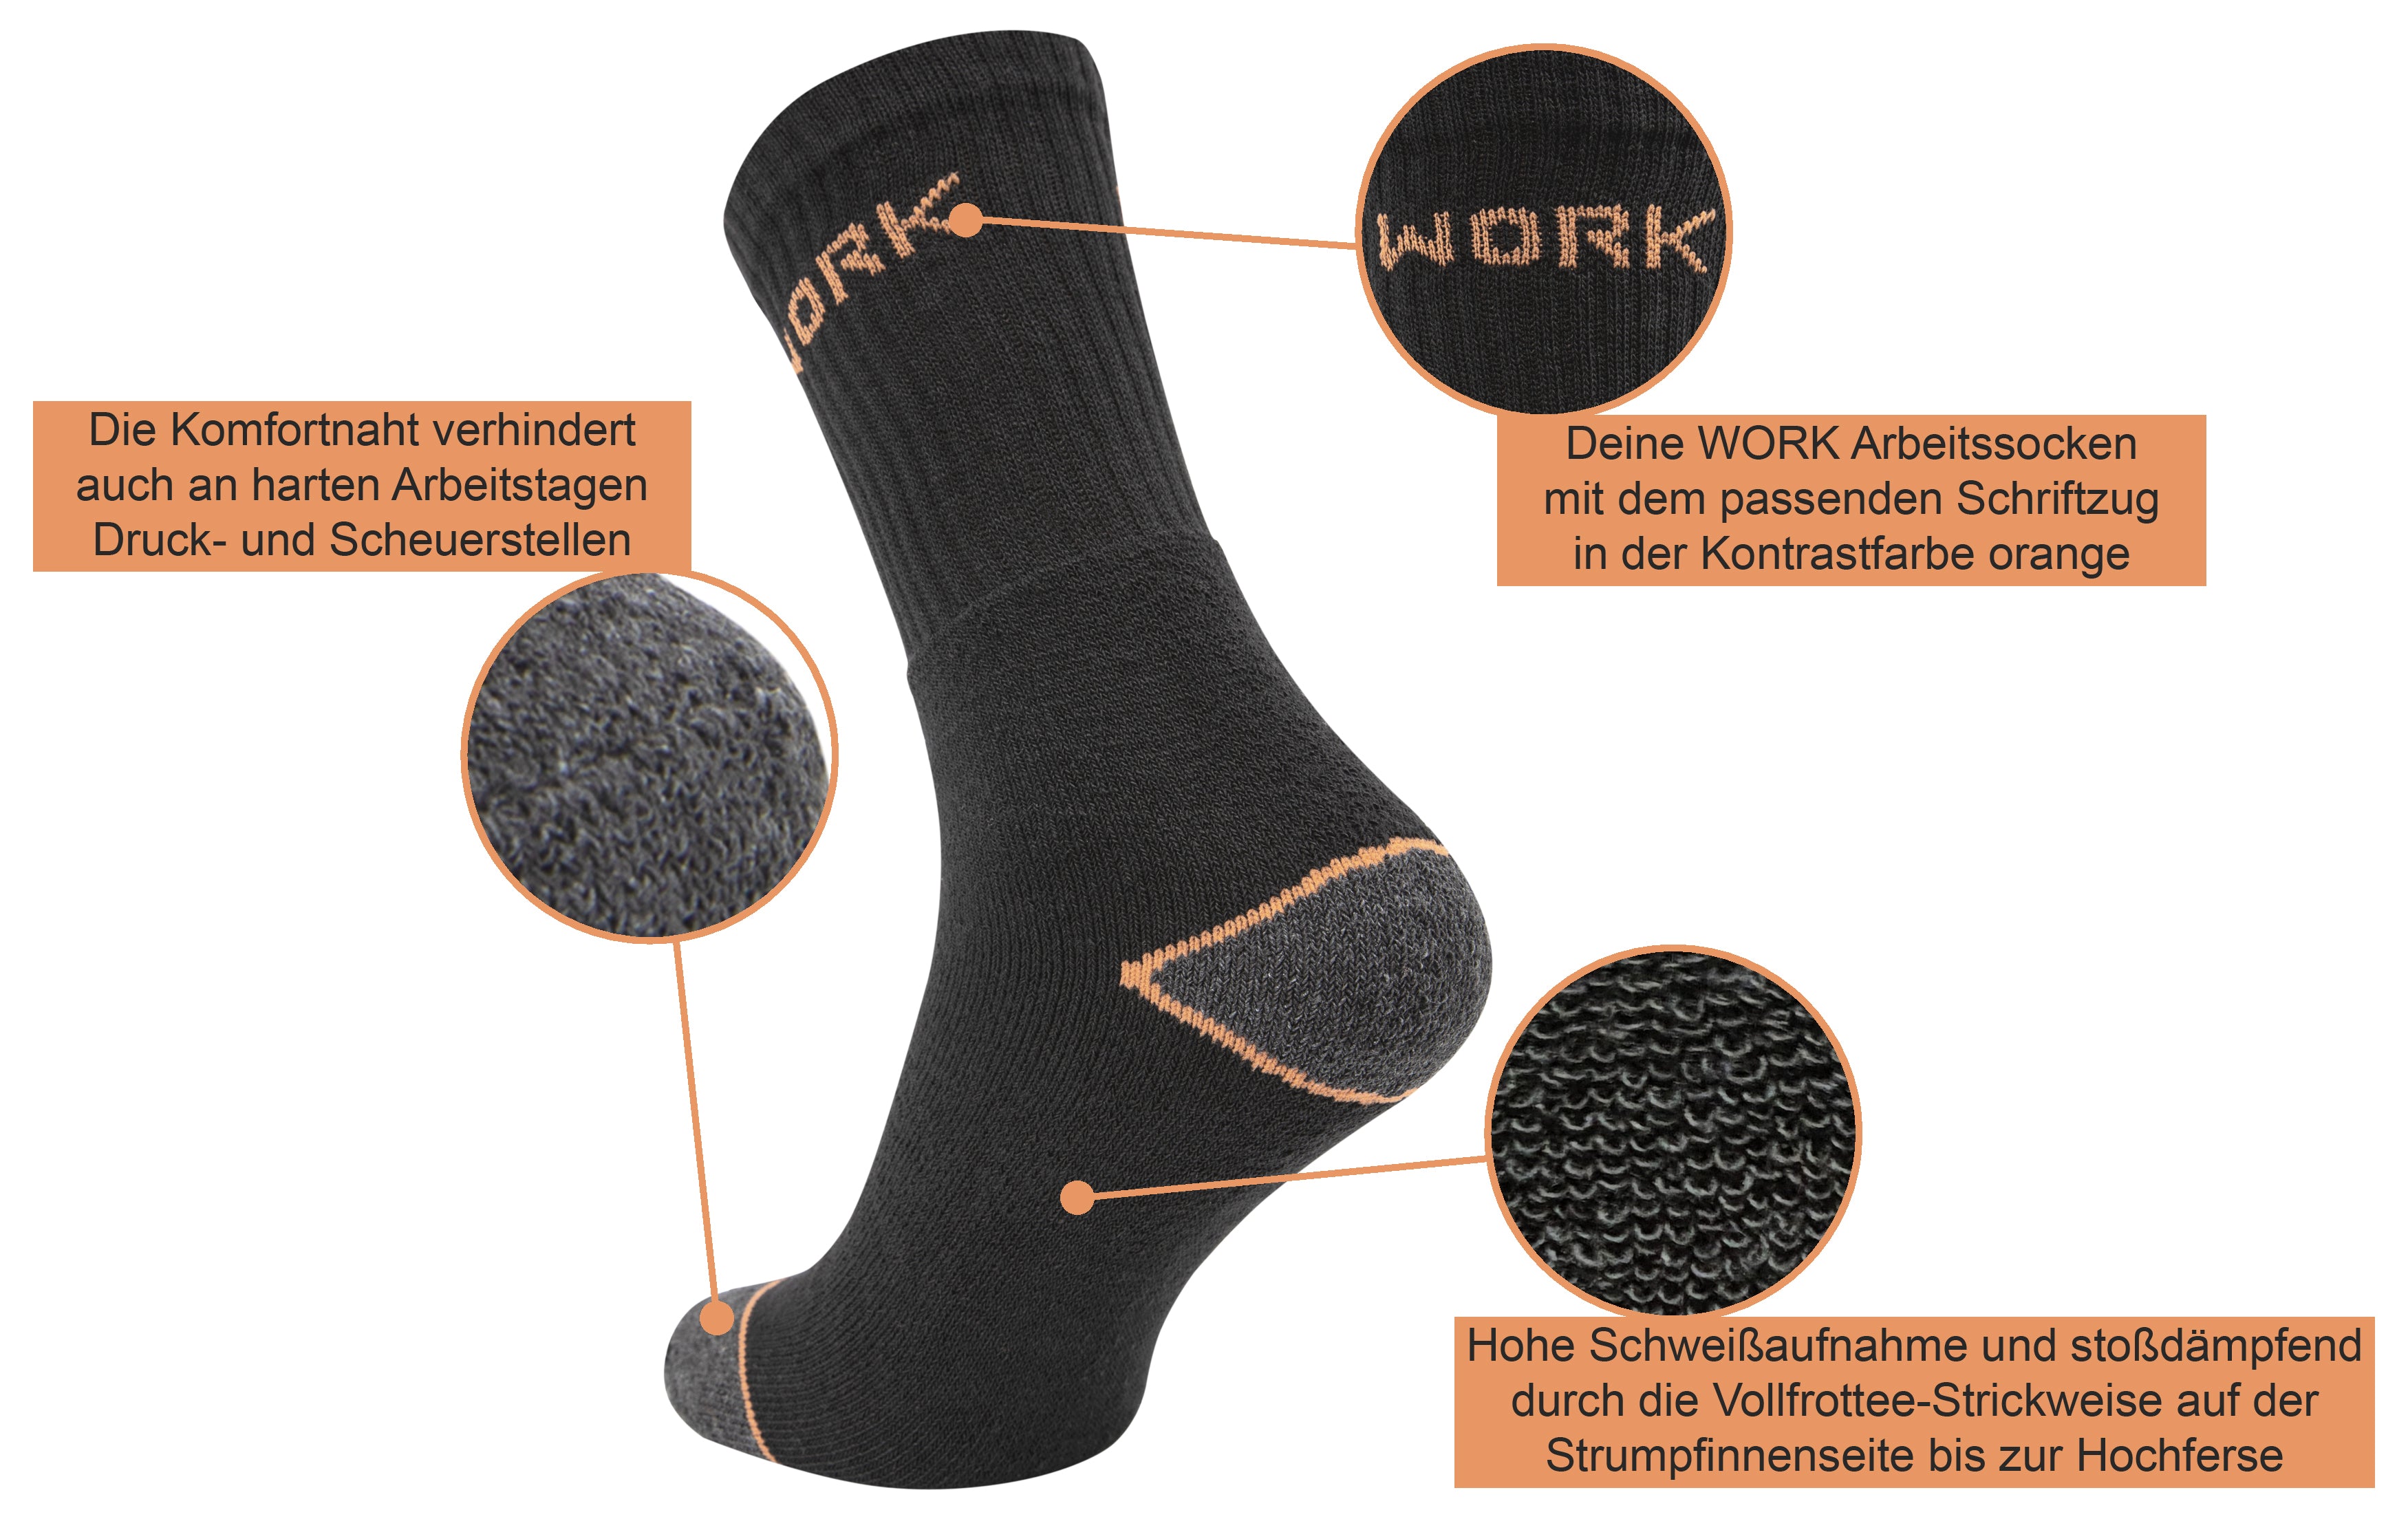 36 – work Renzo® pairs socks 3/6/12/18 Paolo 39/42 and - 43/46 or Traumpreisfabrik sizes